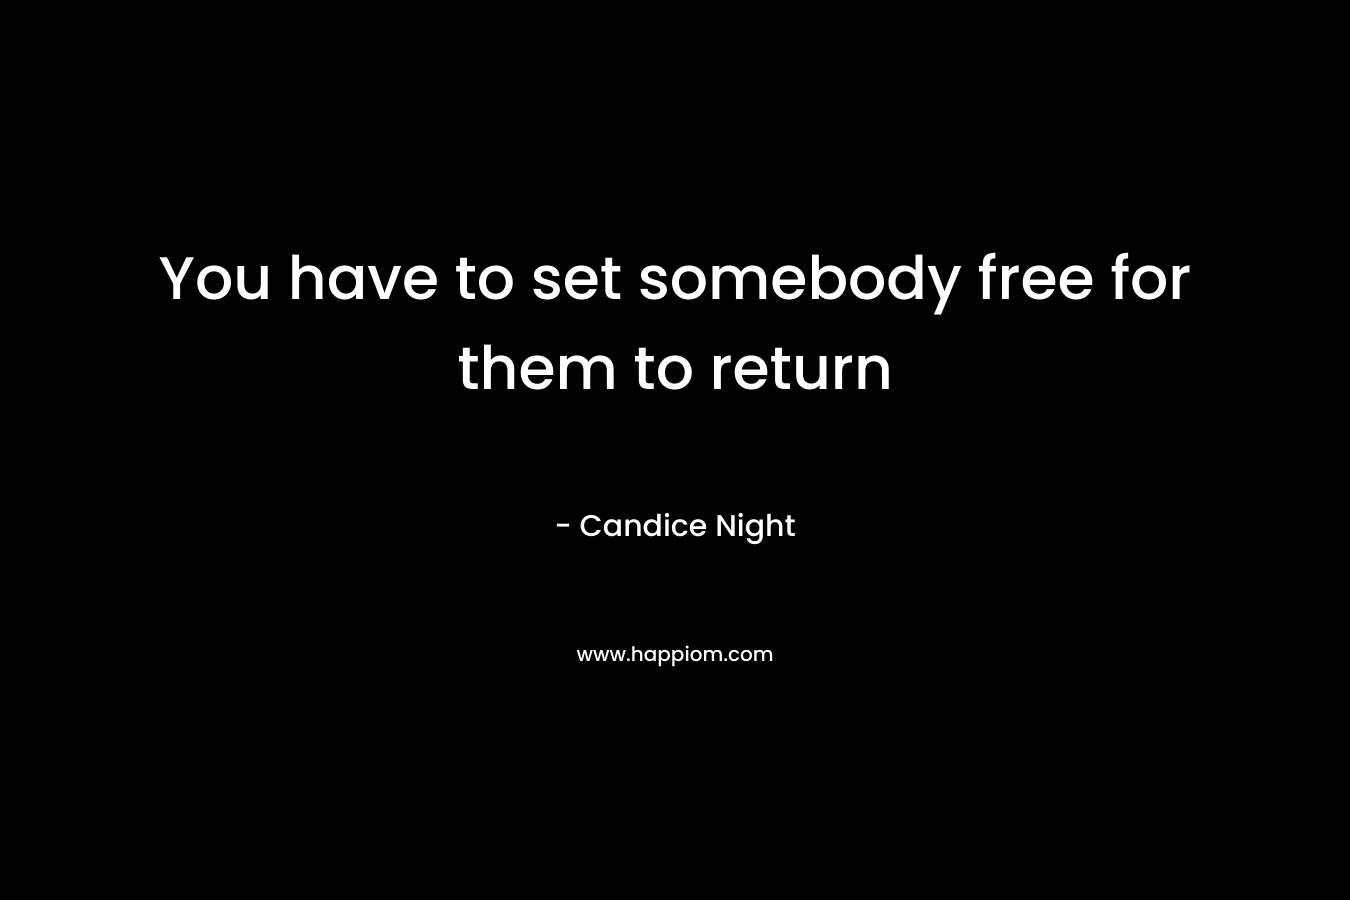 You have to set somebody free for them to return